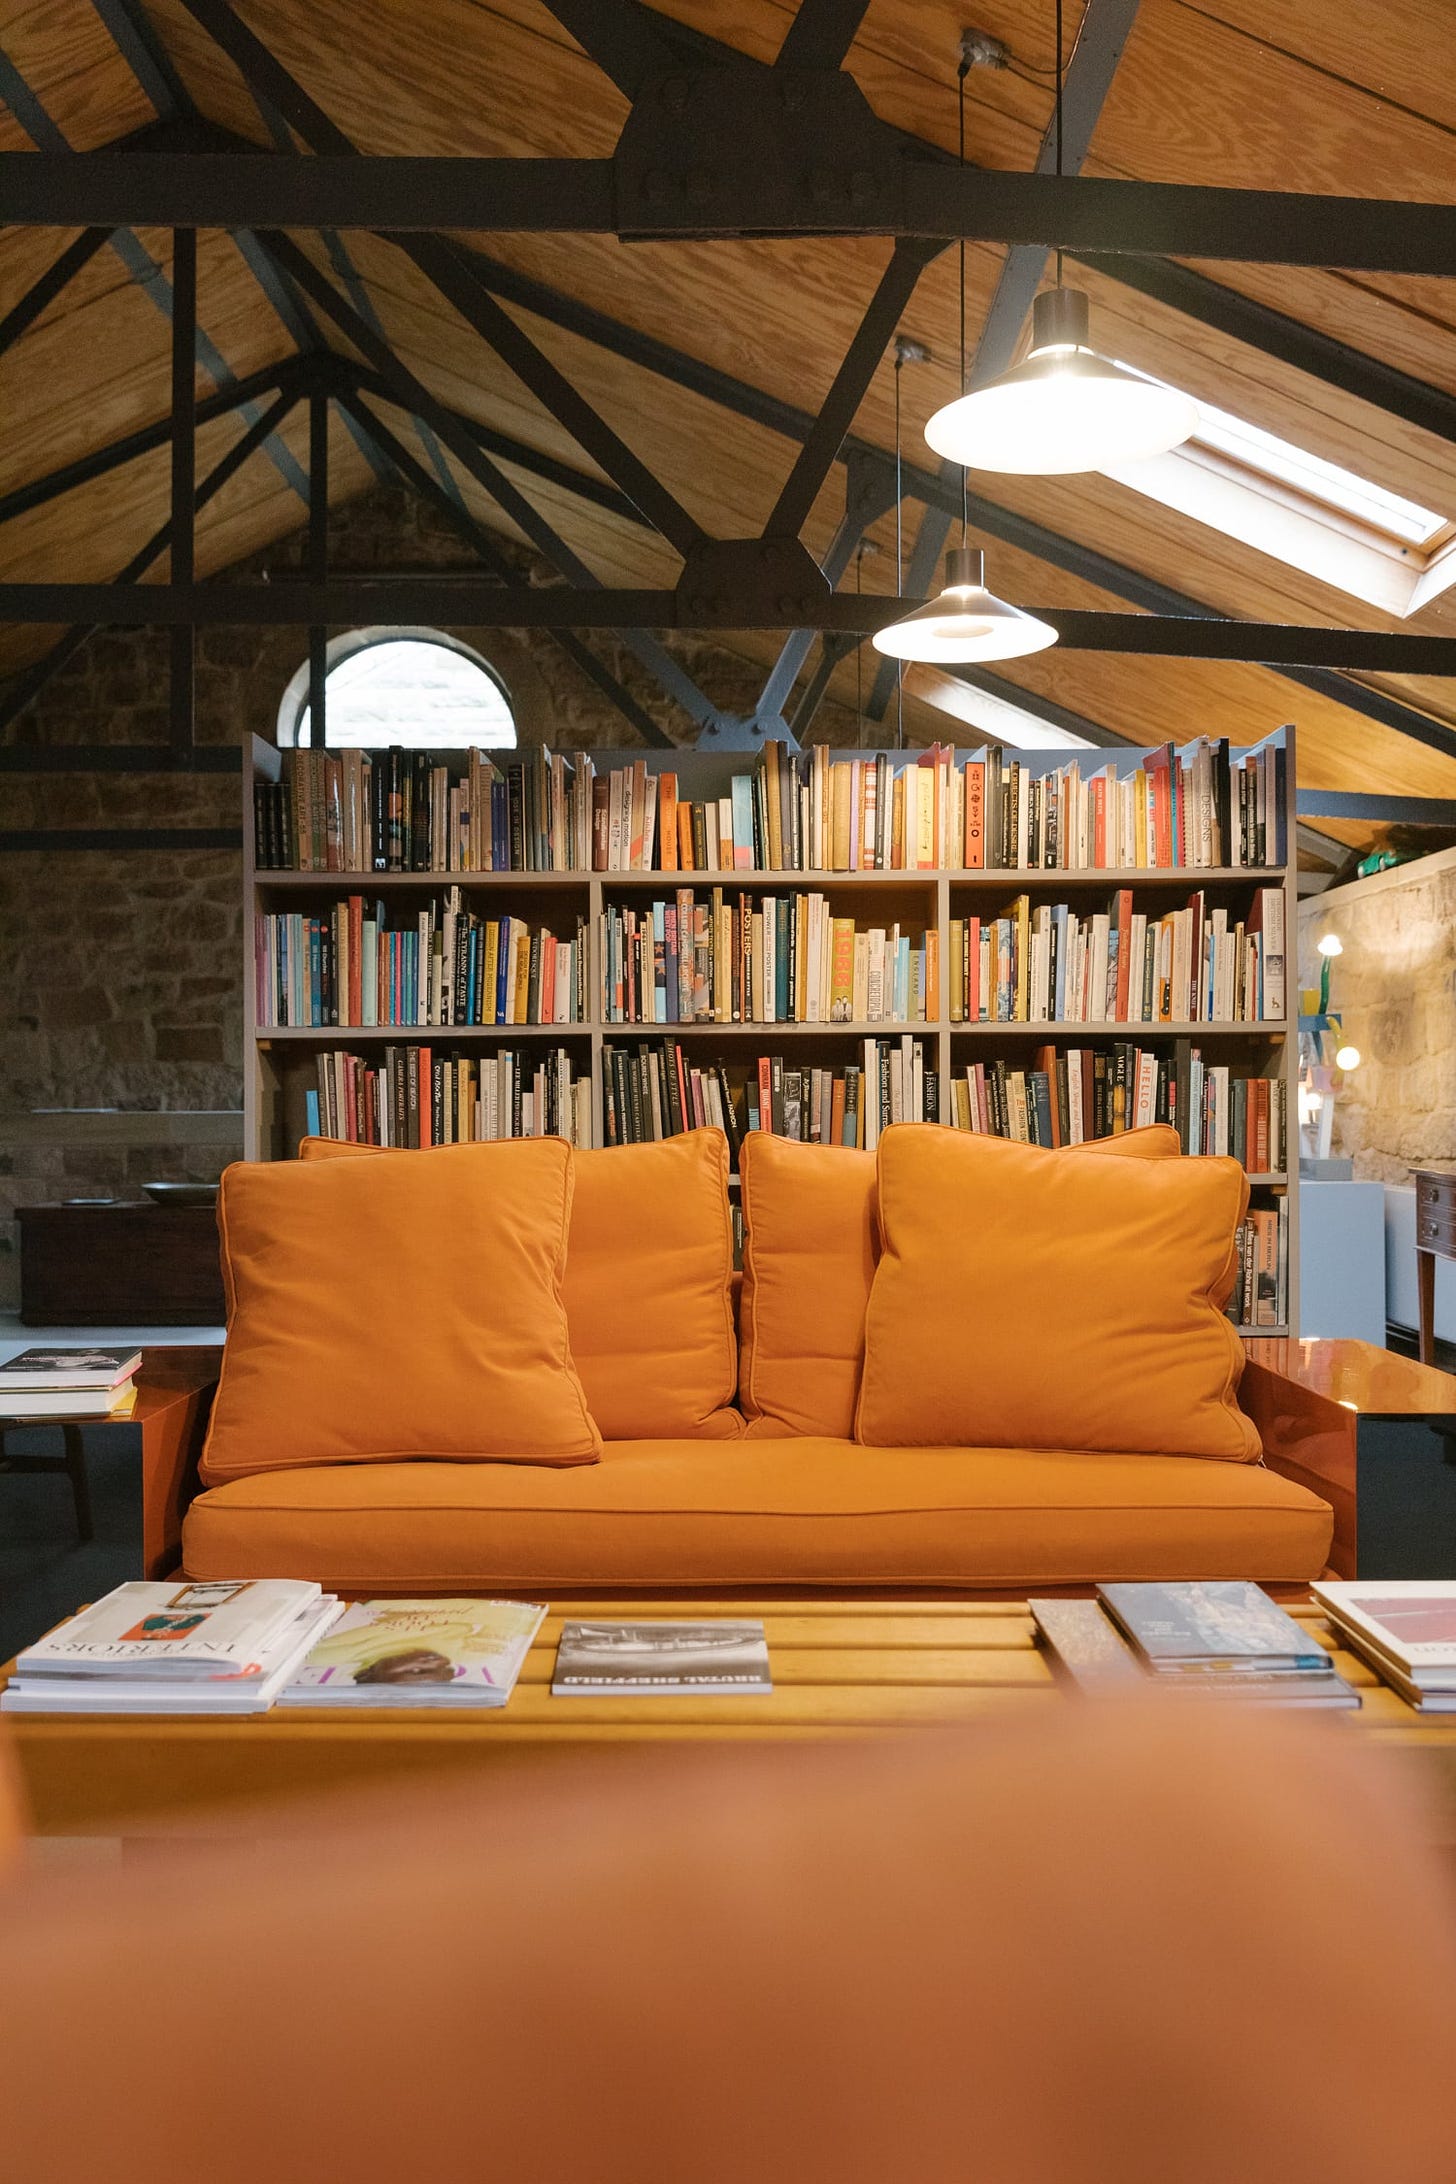 A living room scene with a large 2 seater sofa. Bookshelves behind the sofa full of design and art books. Stone walls and a vaulted ceiling with steel frame.